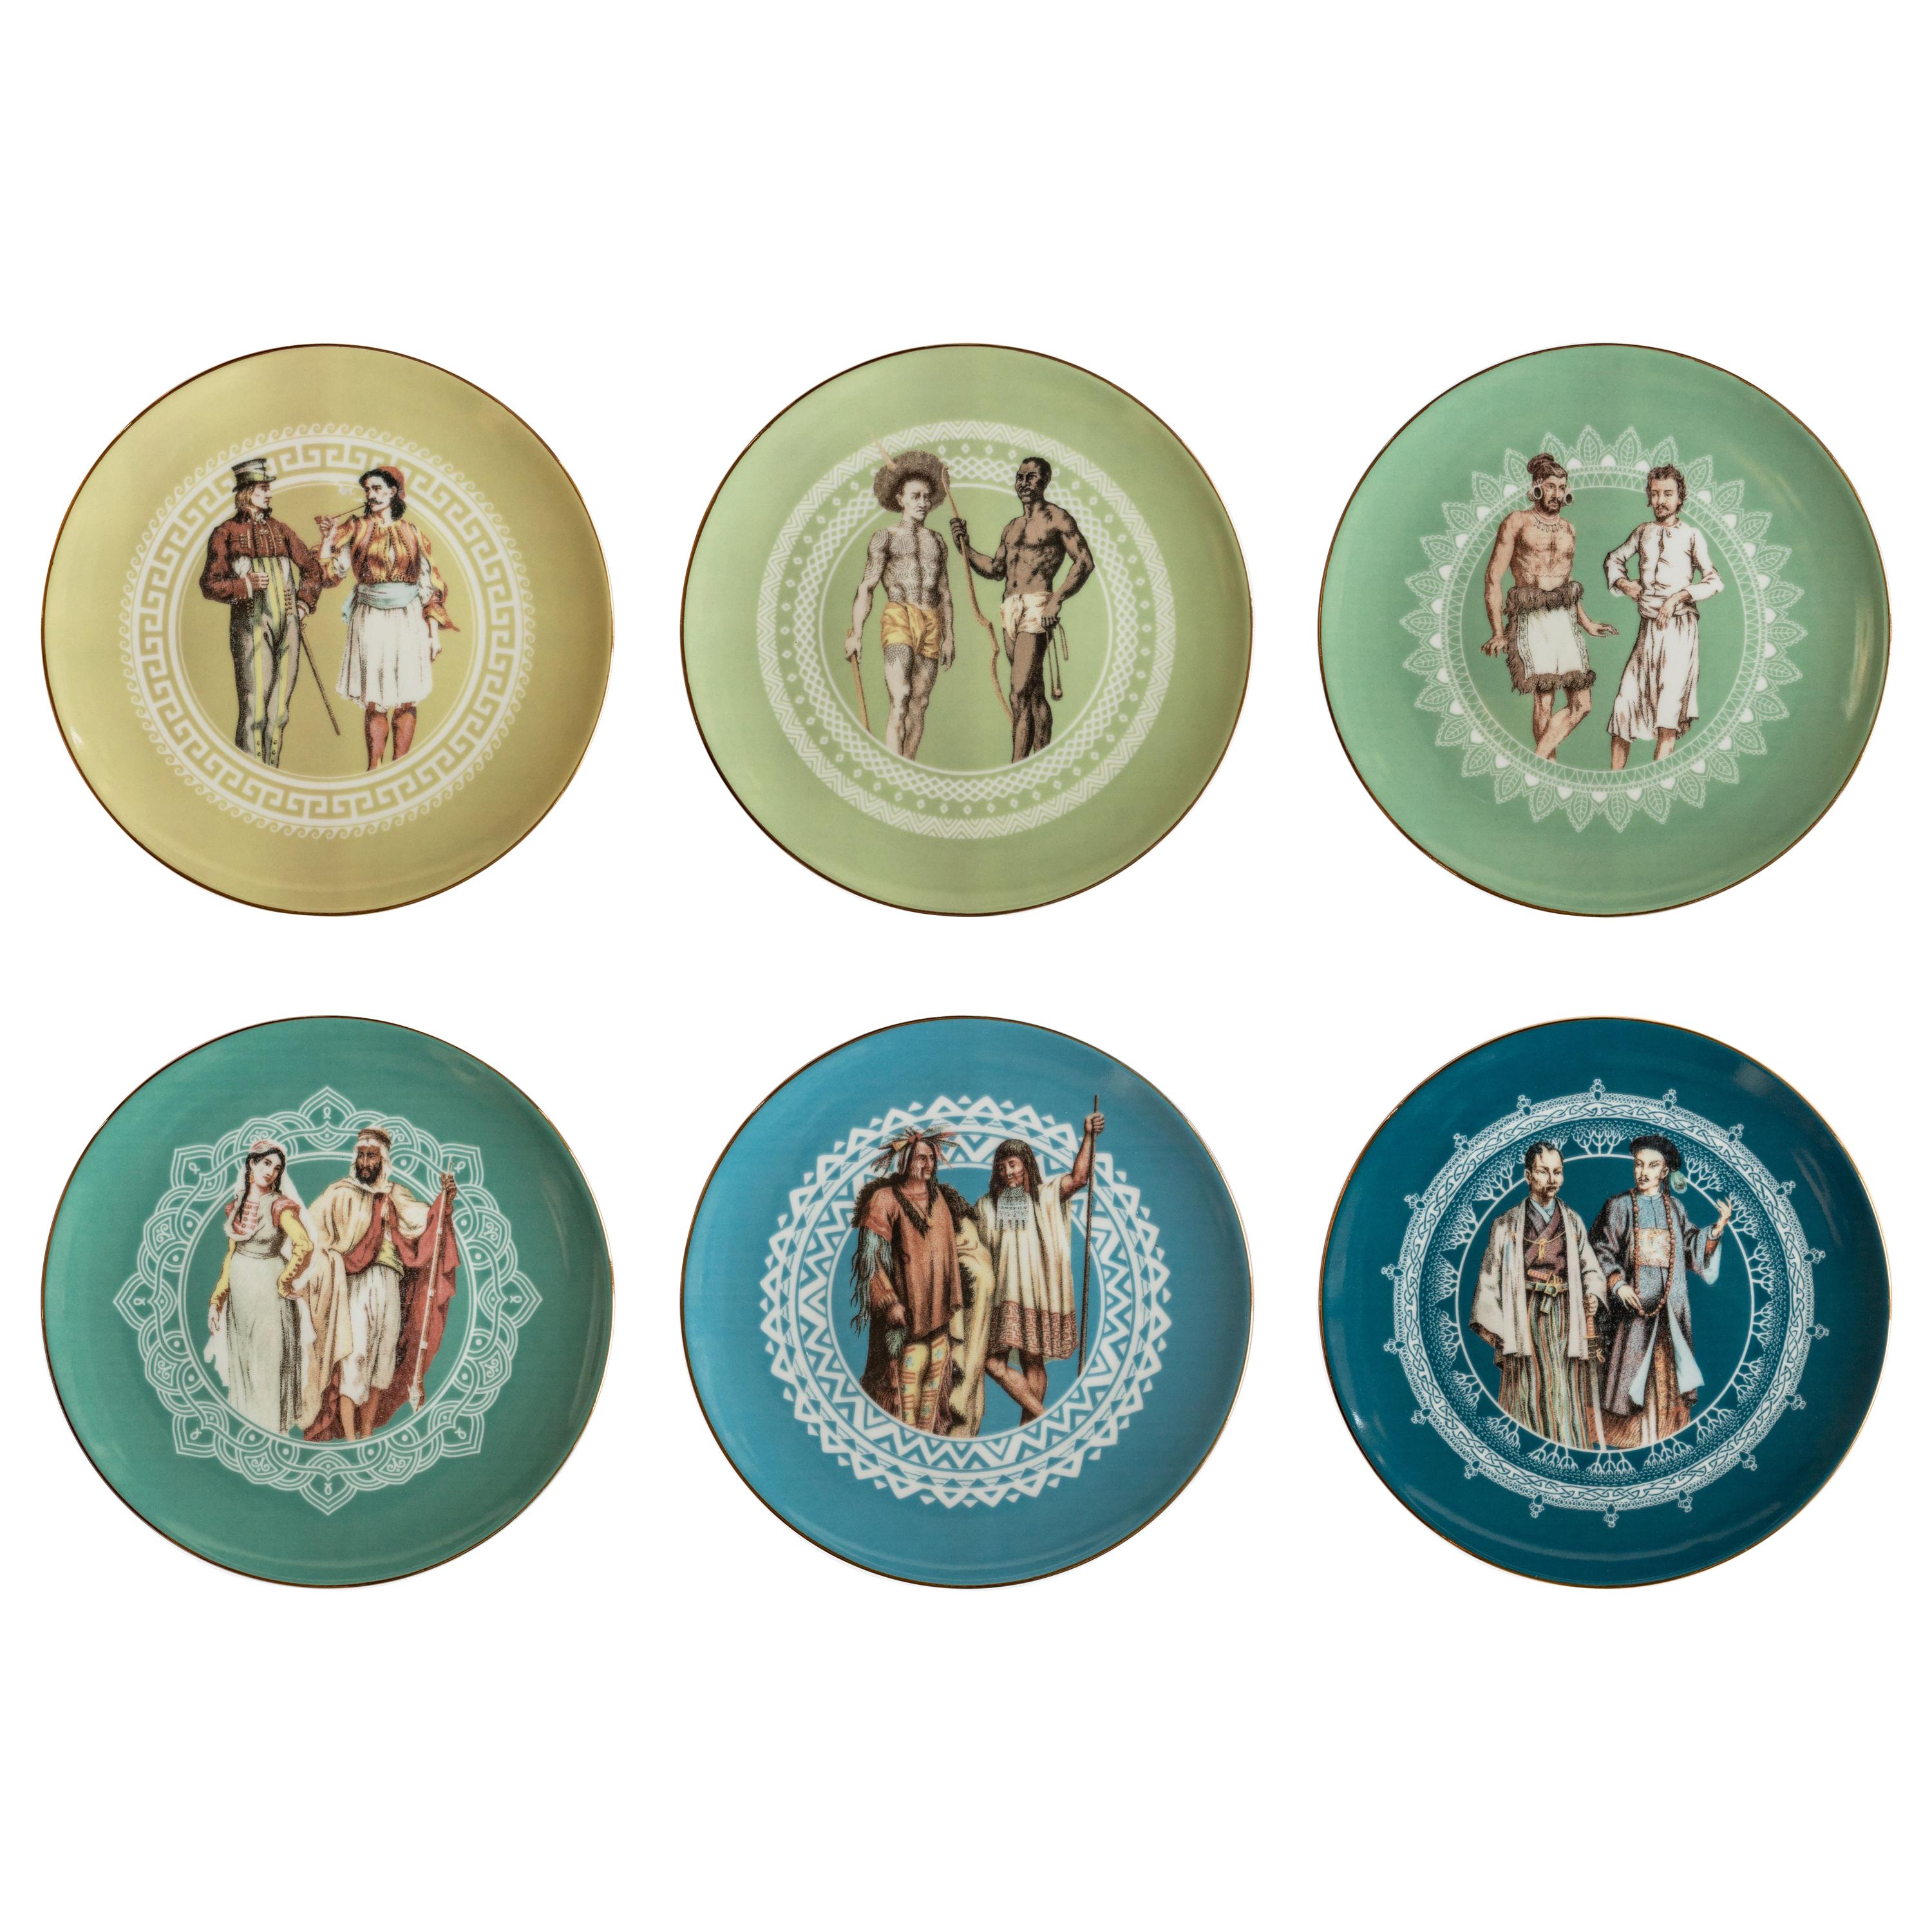 Human Being, Six Contemporary Porcelain Dessert Plates with Decorative Design